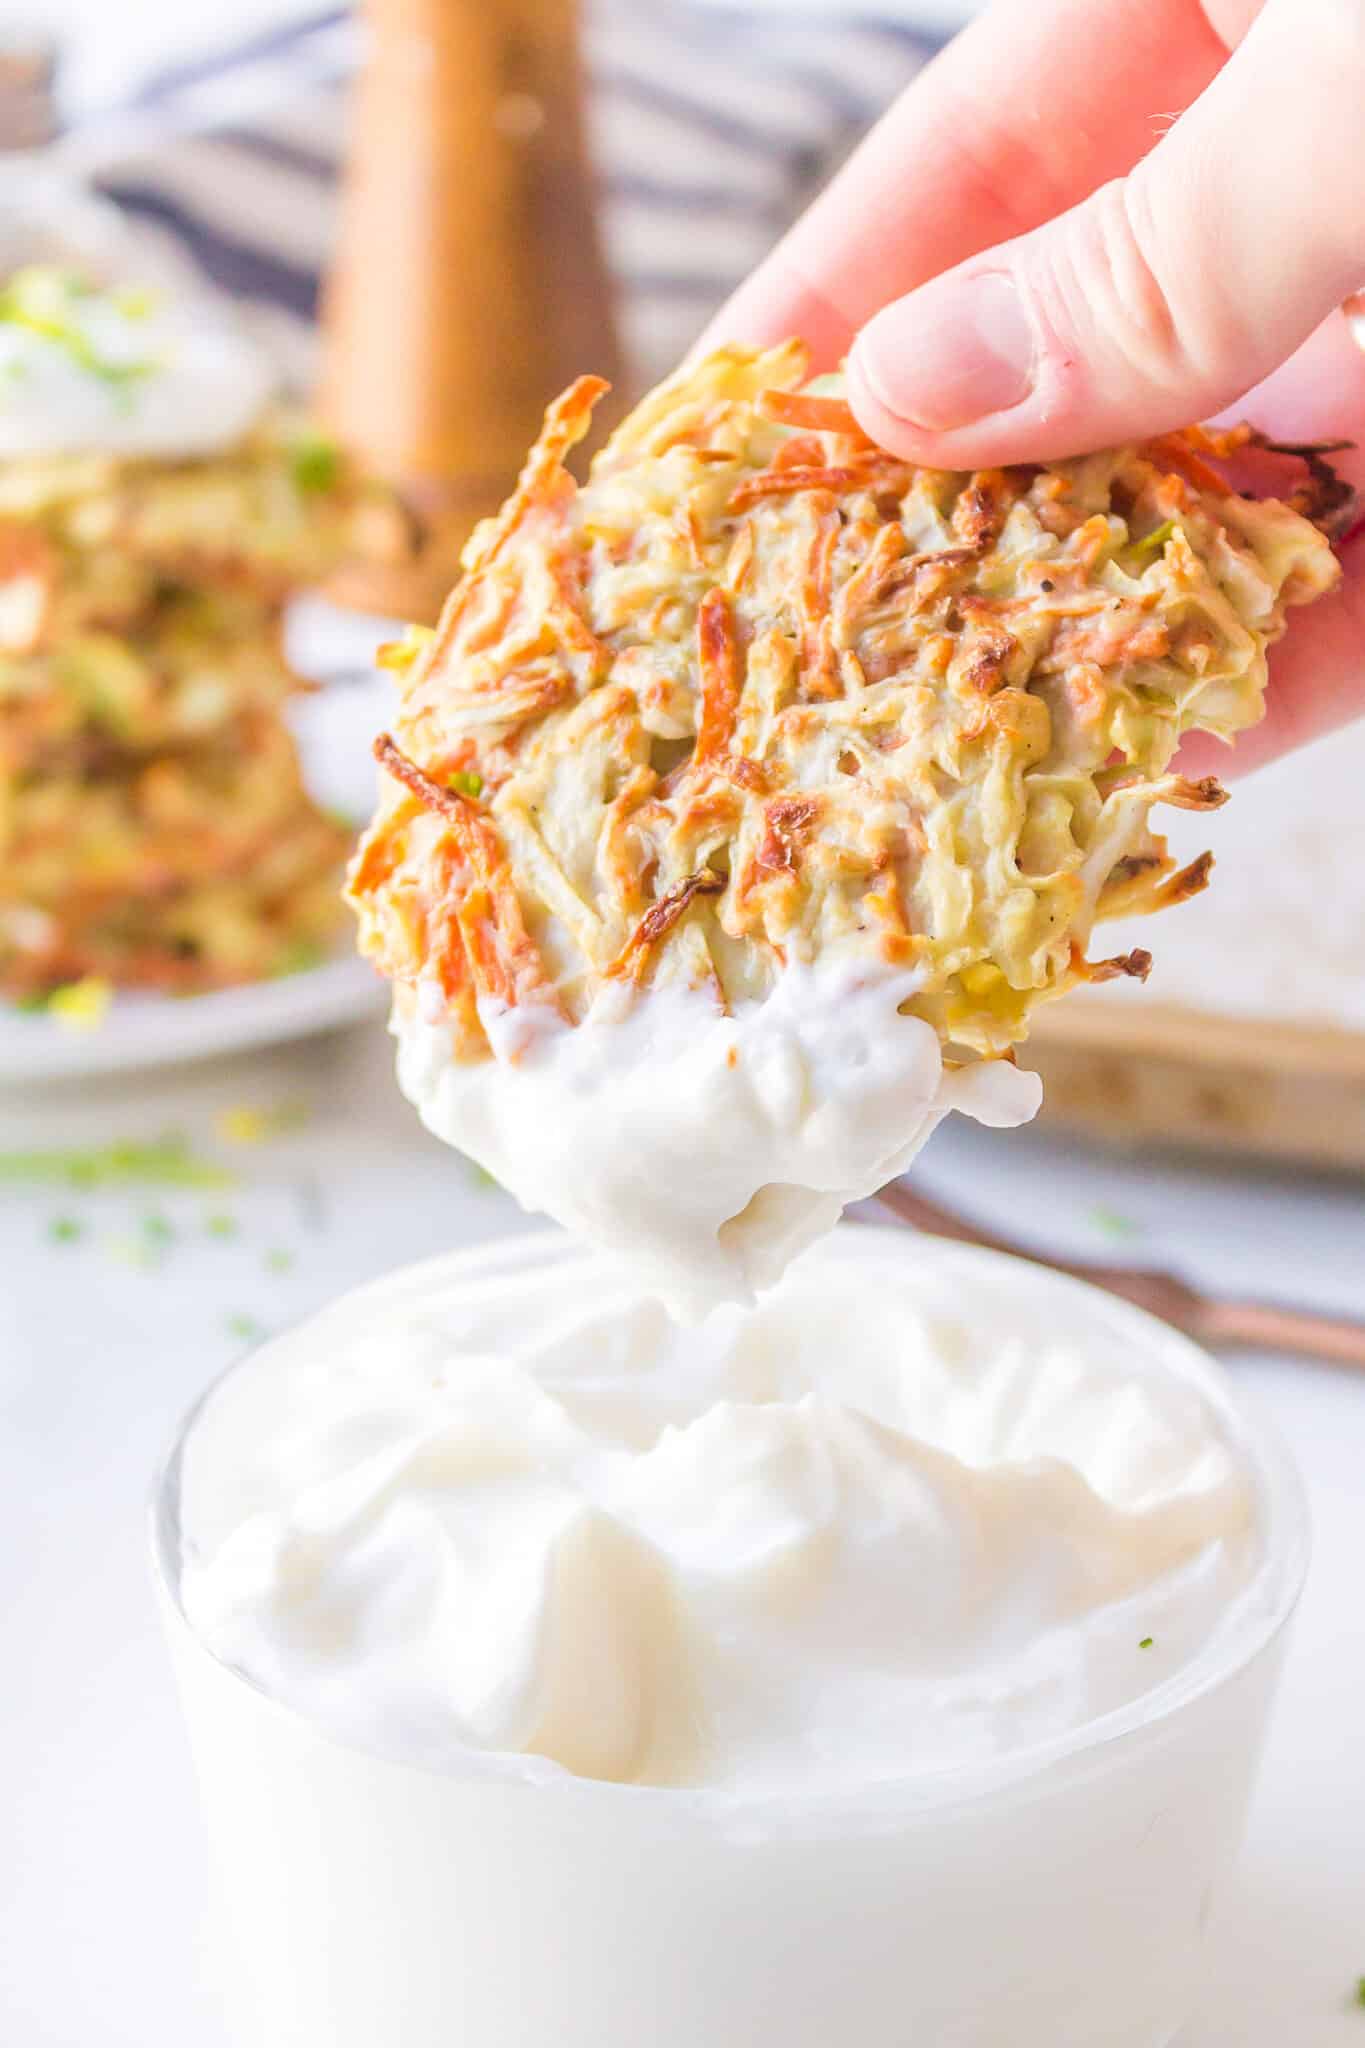 A hand dipping a baked cabbage fritter into sour cream.